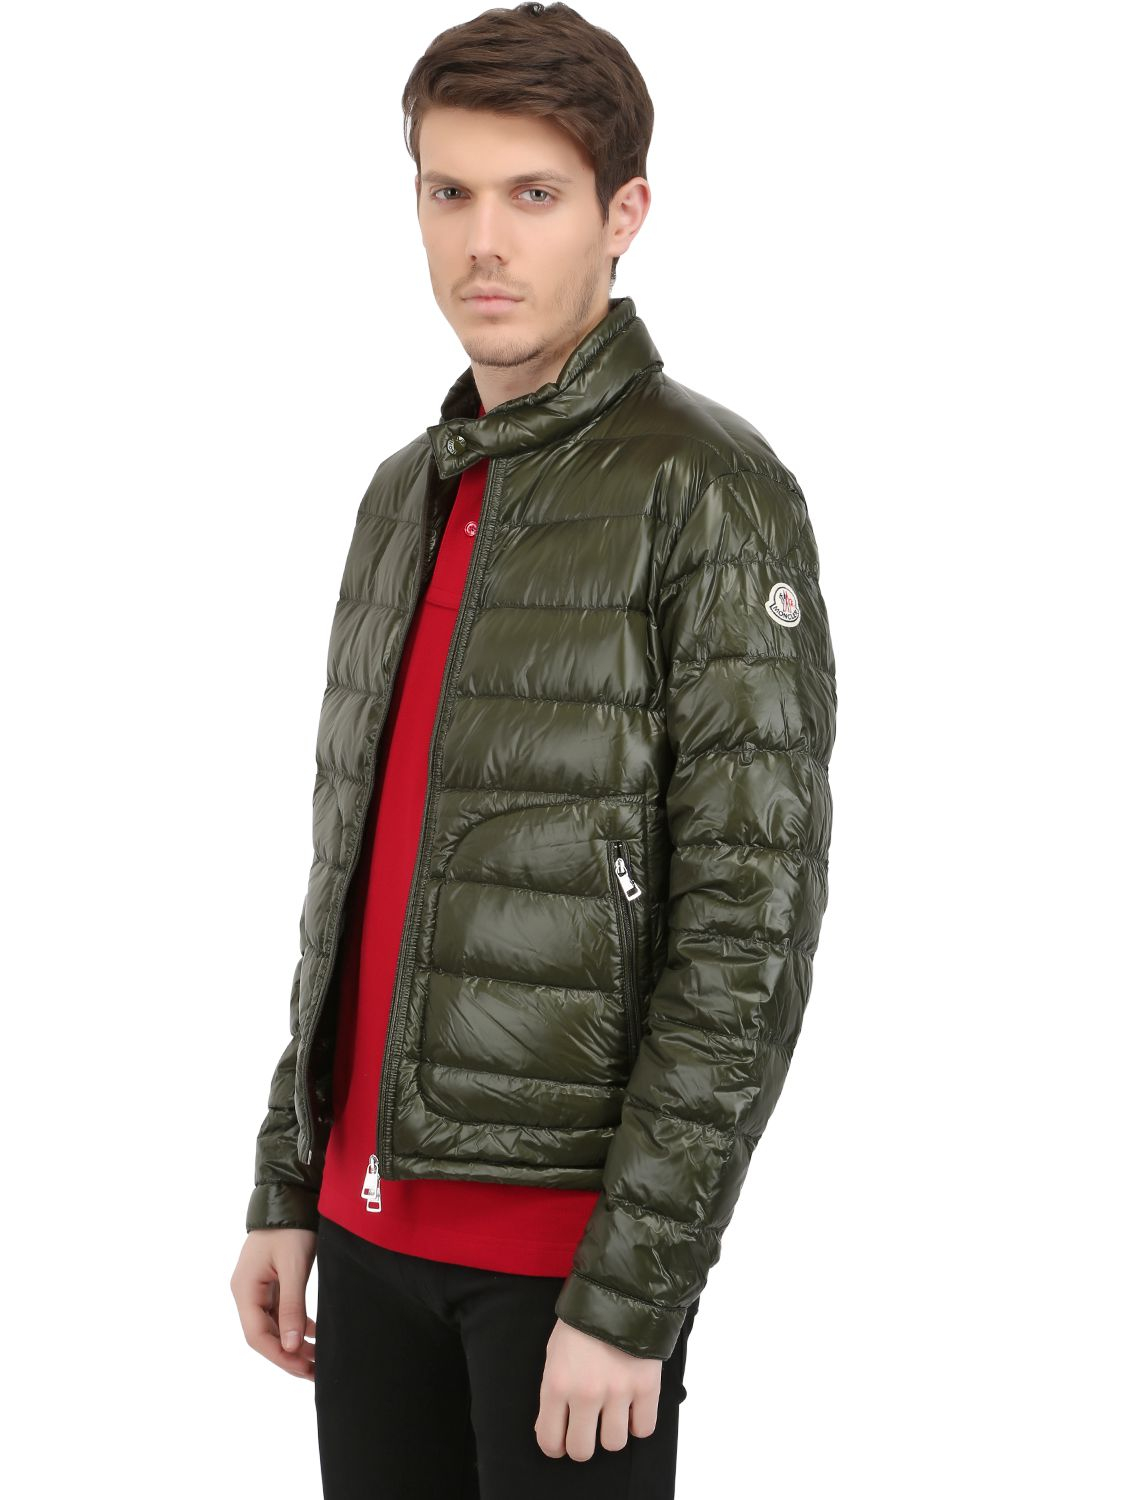 Lyst - Moncler Acorus Nylon Light Weight Down Jacket in Green for Men